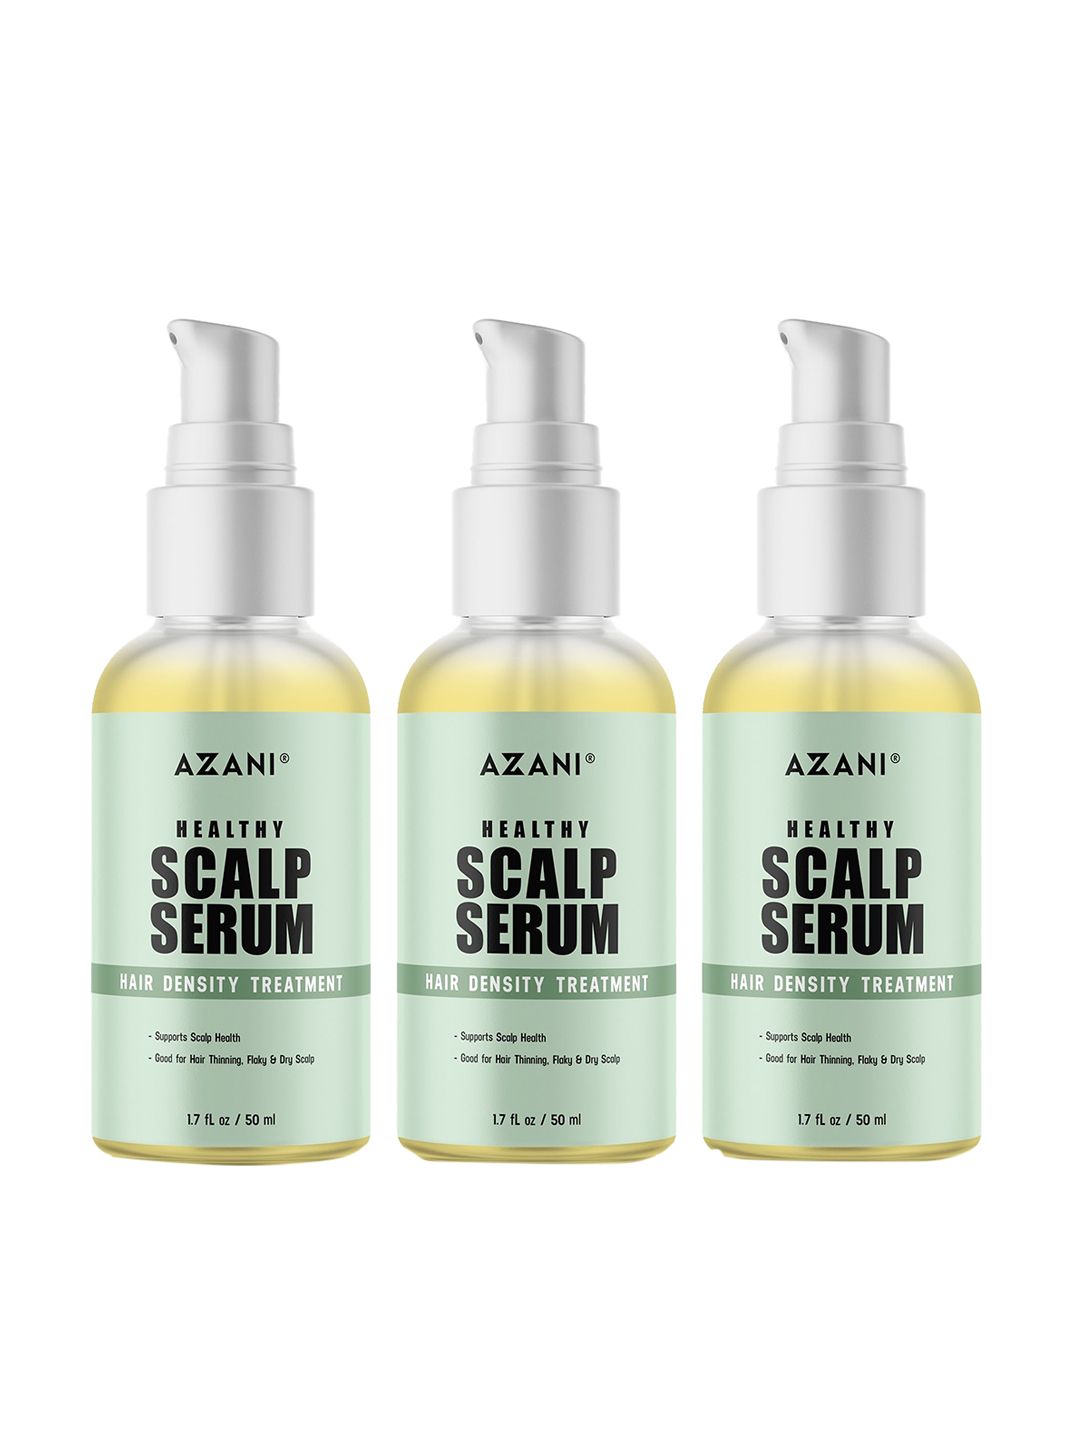 Azani Active Care Set of 3 Healthy Scalp Serums for Hair Density Treatment - 50 ml Each Price in India